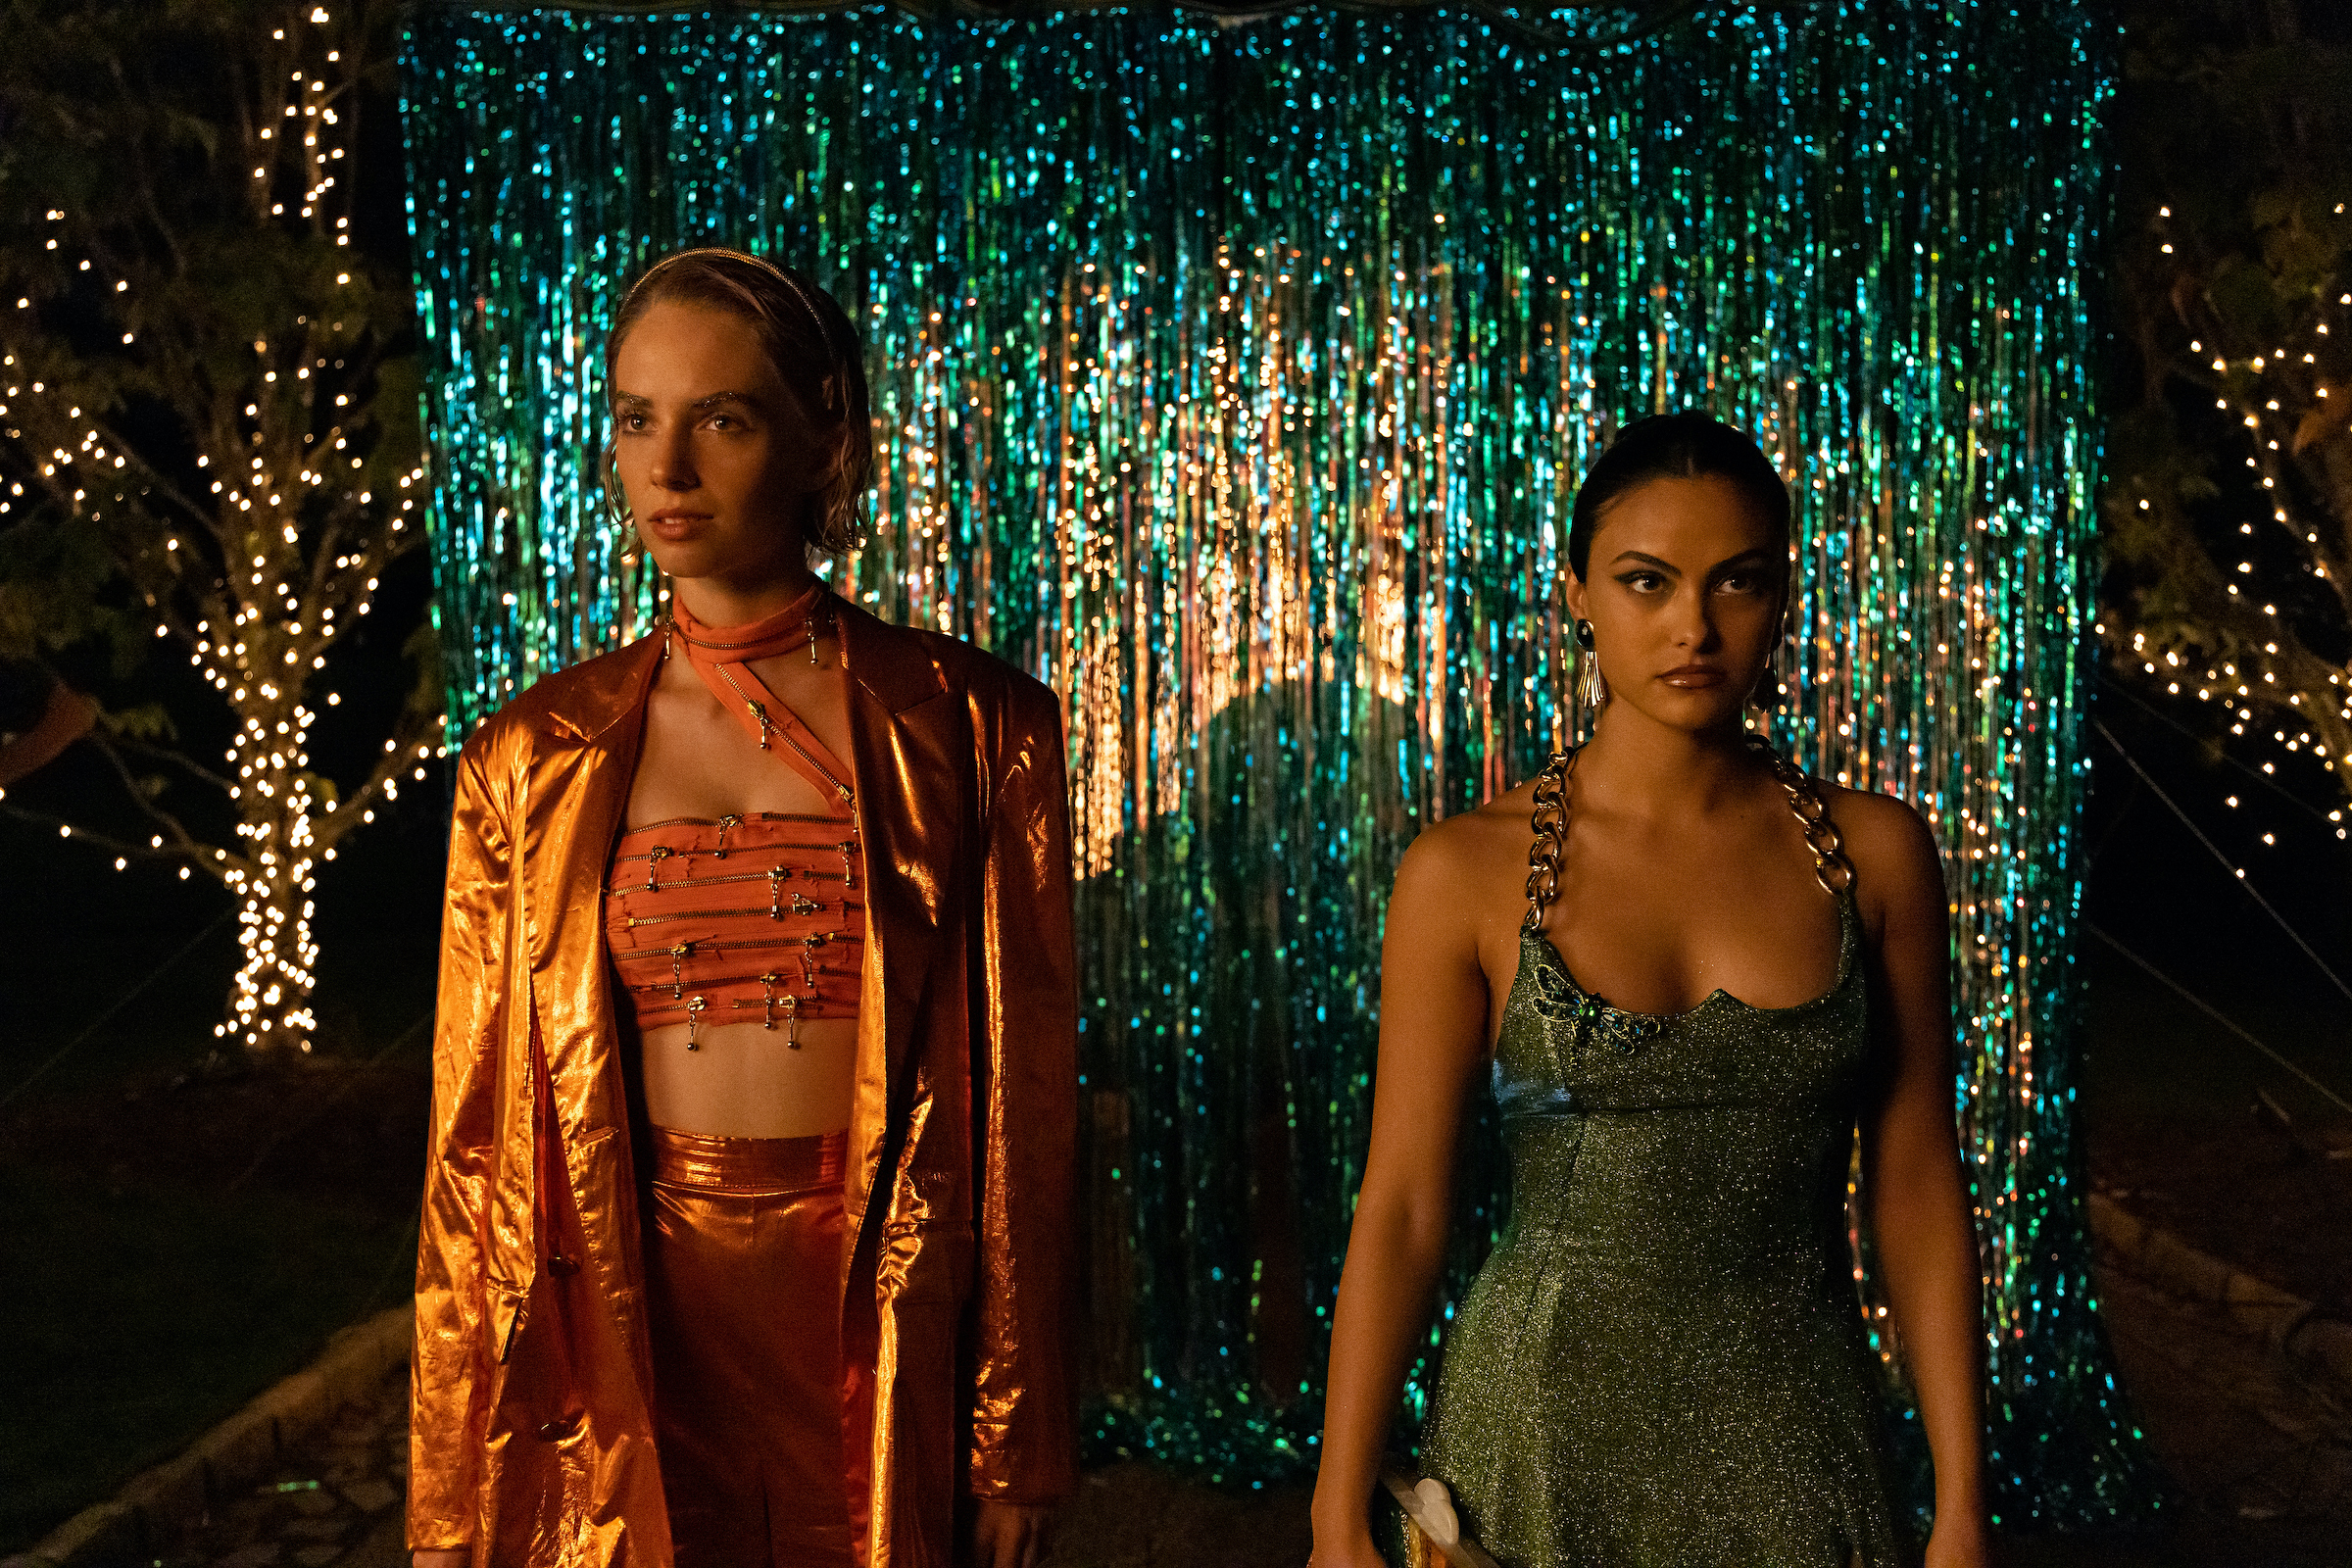 Maya Hawke as Eleanor wears an orange crop top full of zippers under a foil orange suit and Camila Mendes as Drea wears a blue sequined dress with a chain halter neck.